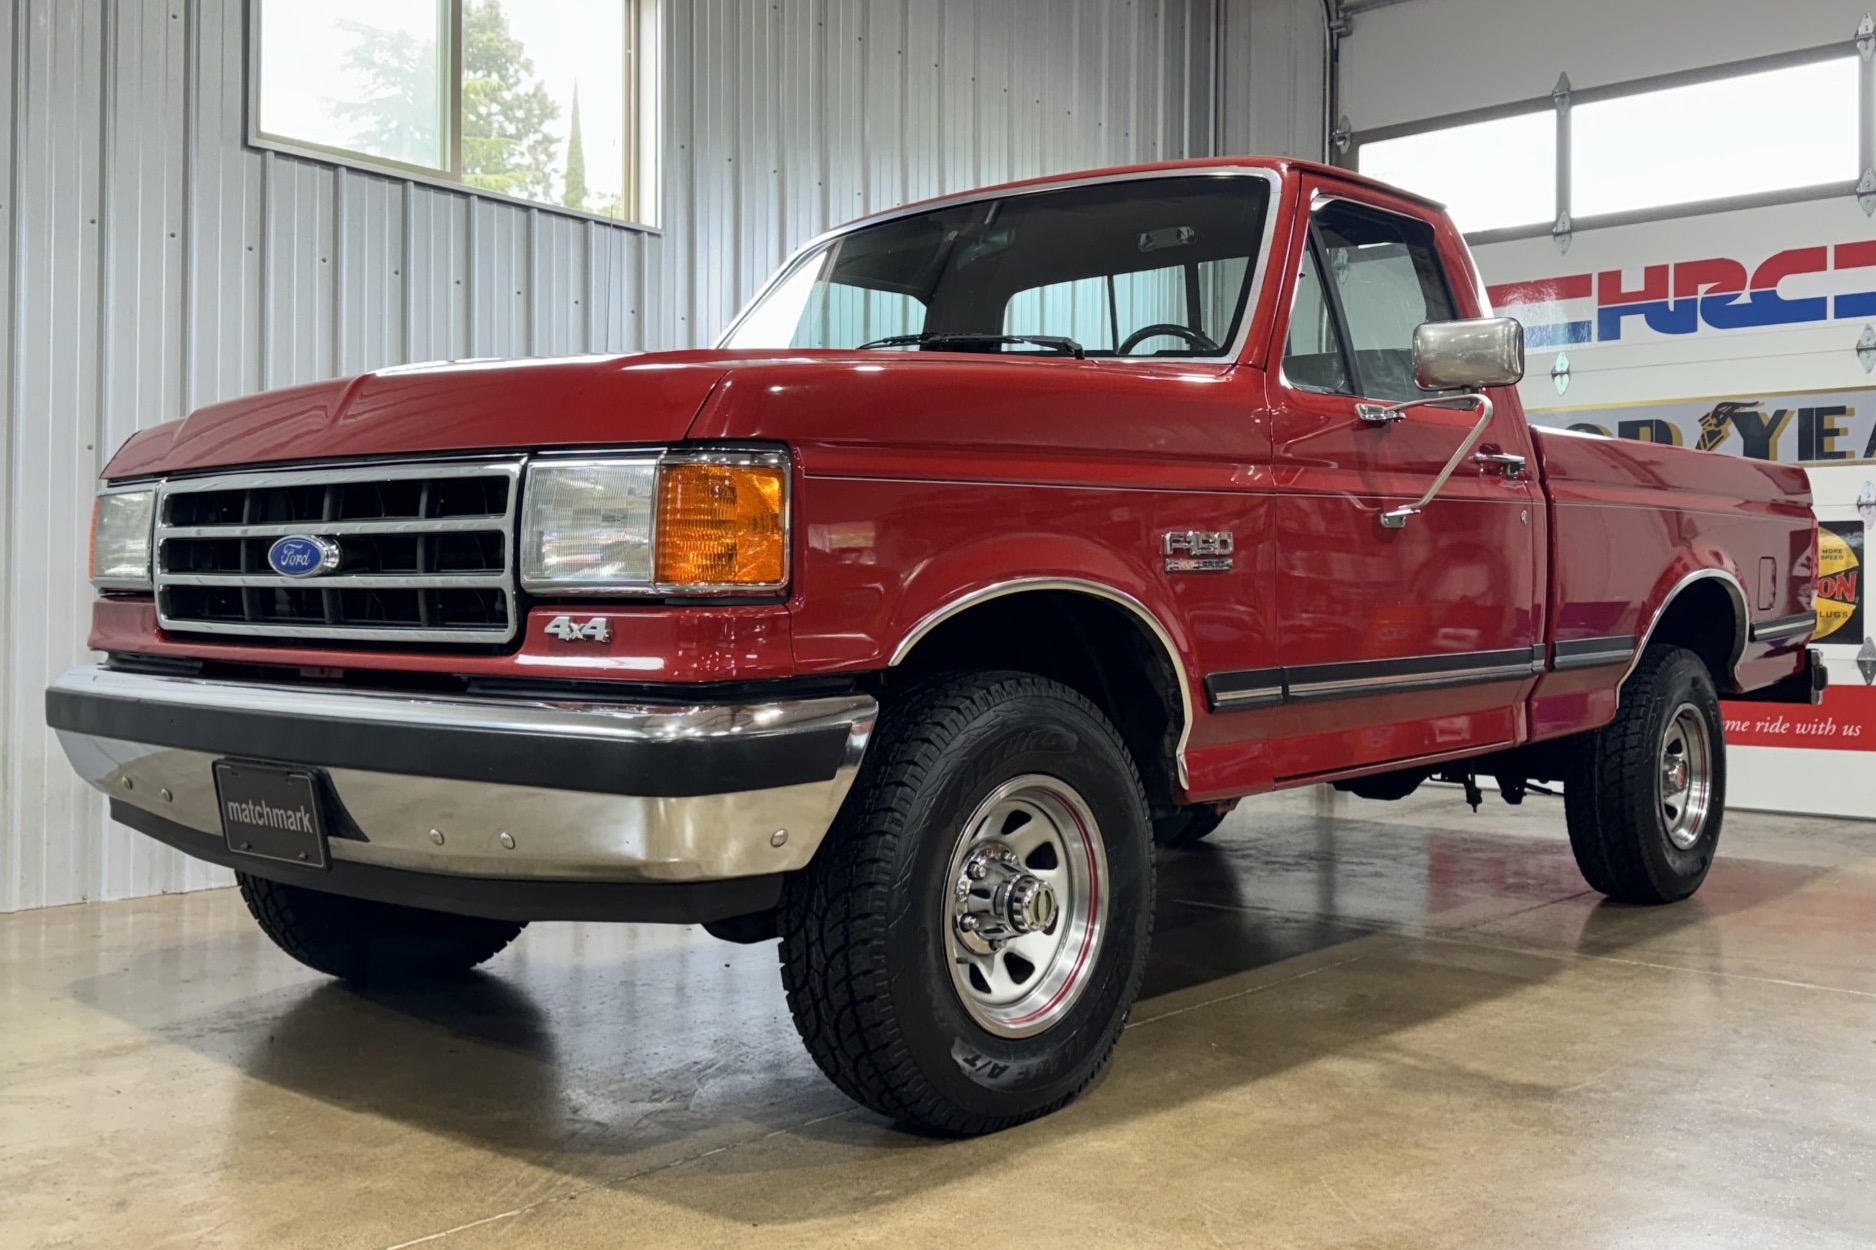 Used 1989 Ford F-150 XLT Lariat 4-Speed 4×4 Review